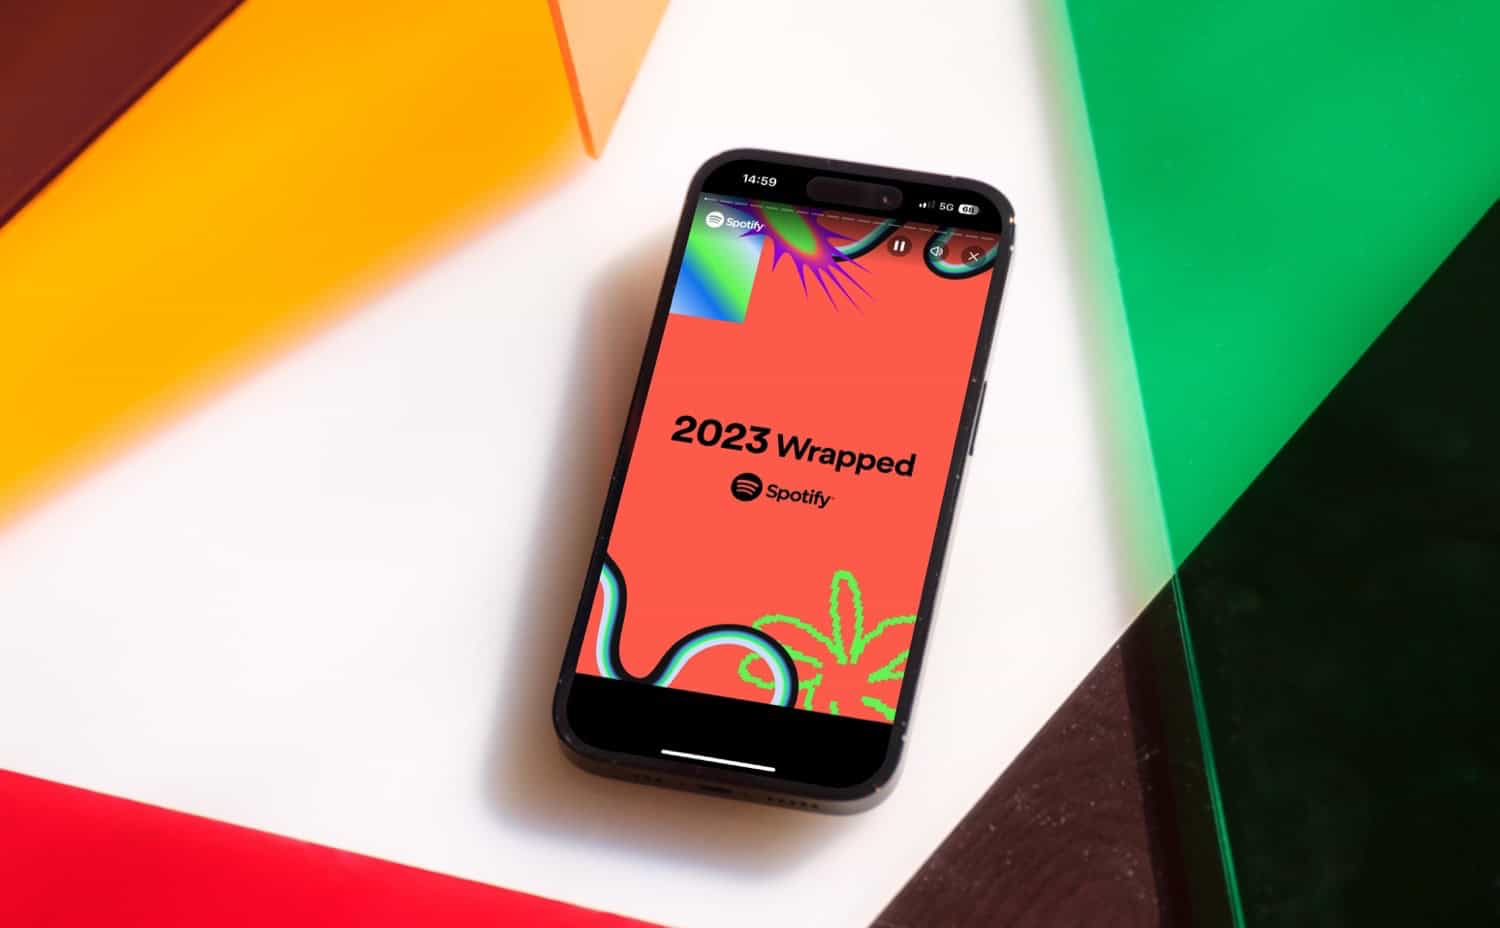 Spotify Wrapped 2023 poster